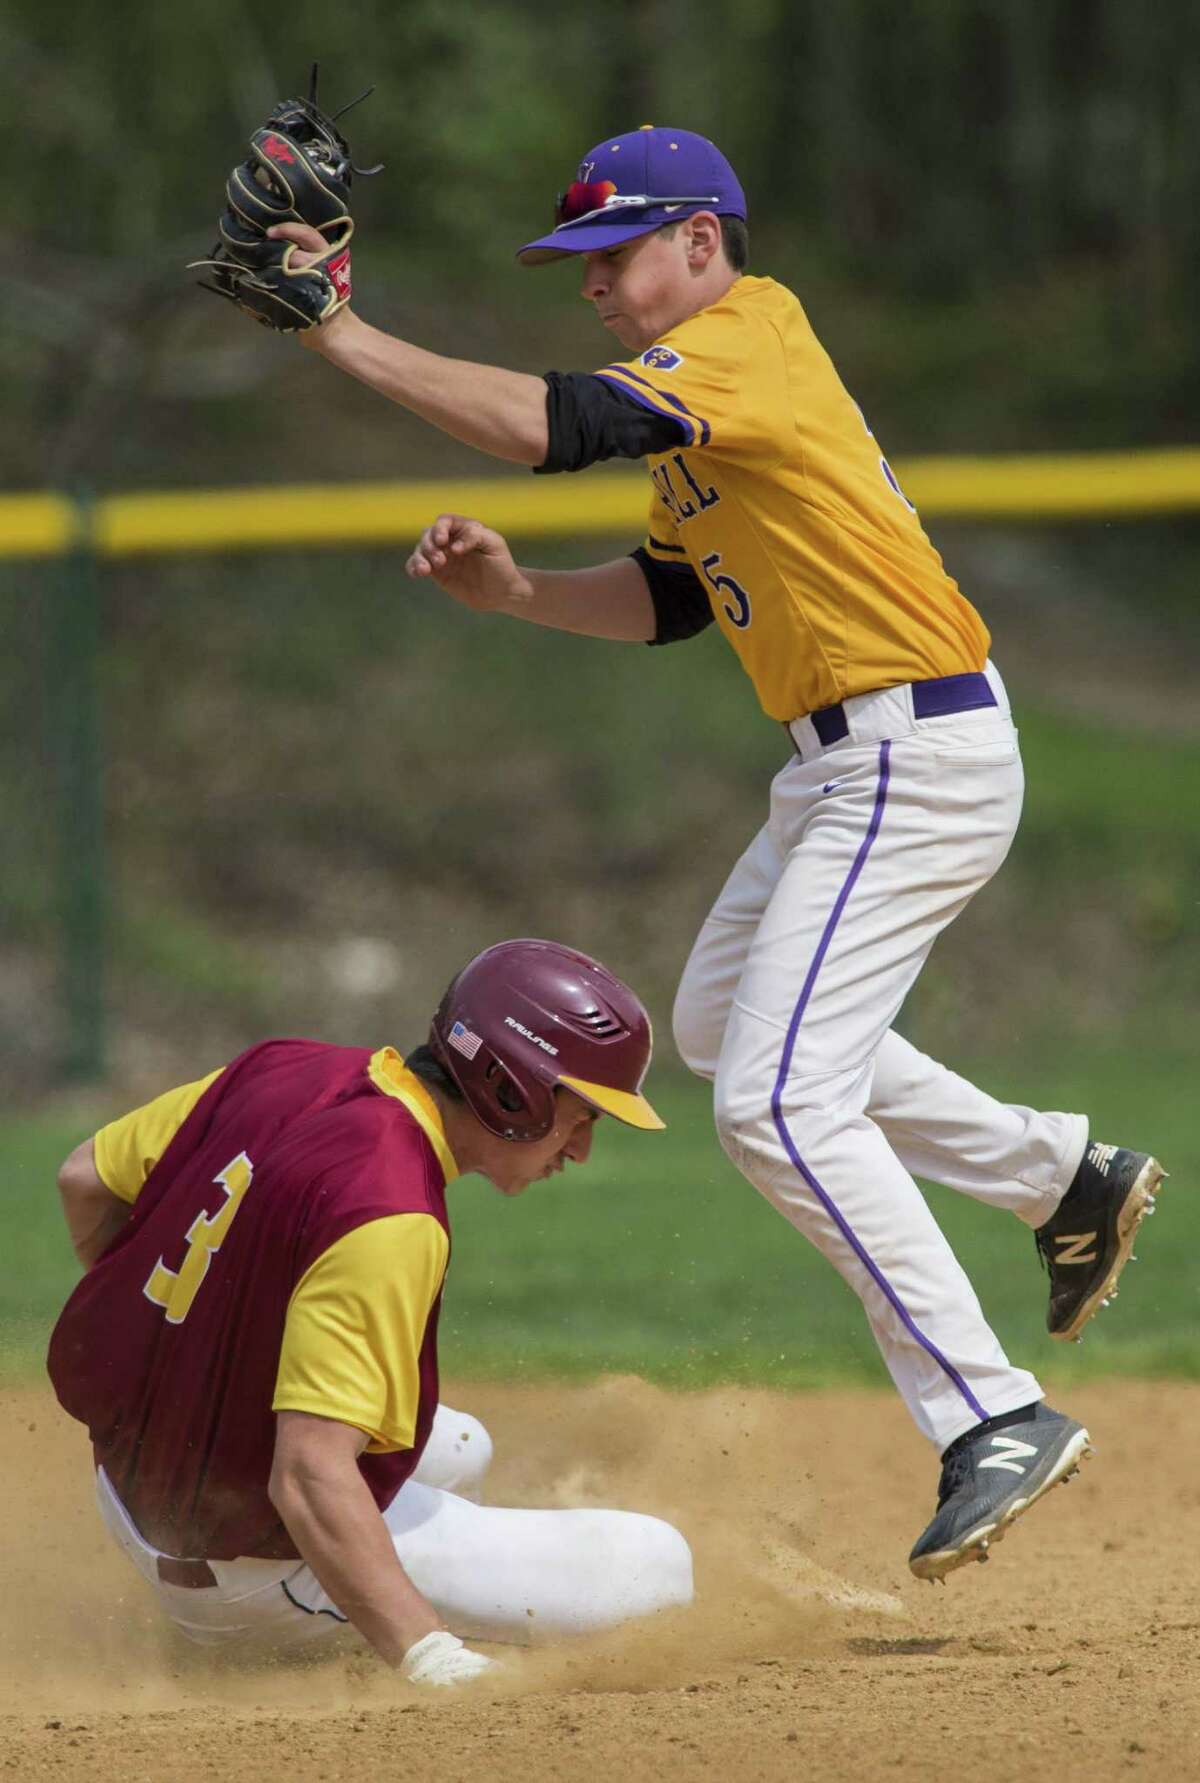 St. Joseph High School?’s Stephen Paolini slides safely into second as Westhill High School?’s Timothy Wainwright can?’t get the tag down in time during a baseball game played at St. Joseph High School, Trumbull, CT. Saturday, May 5, 2018.